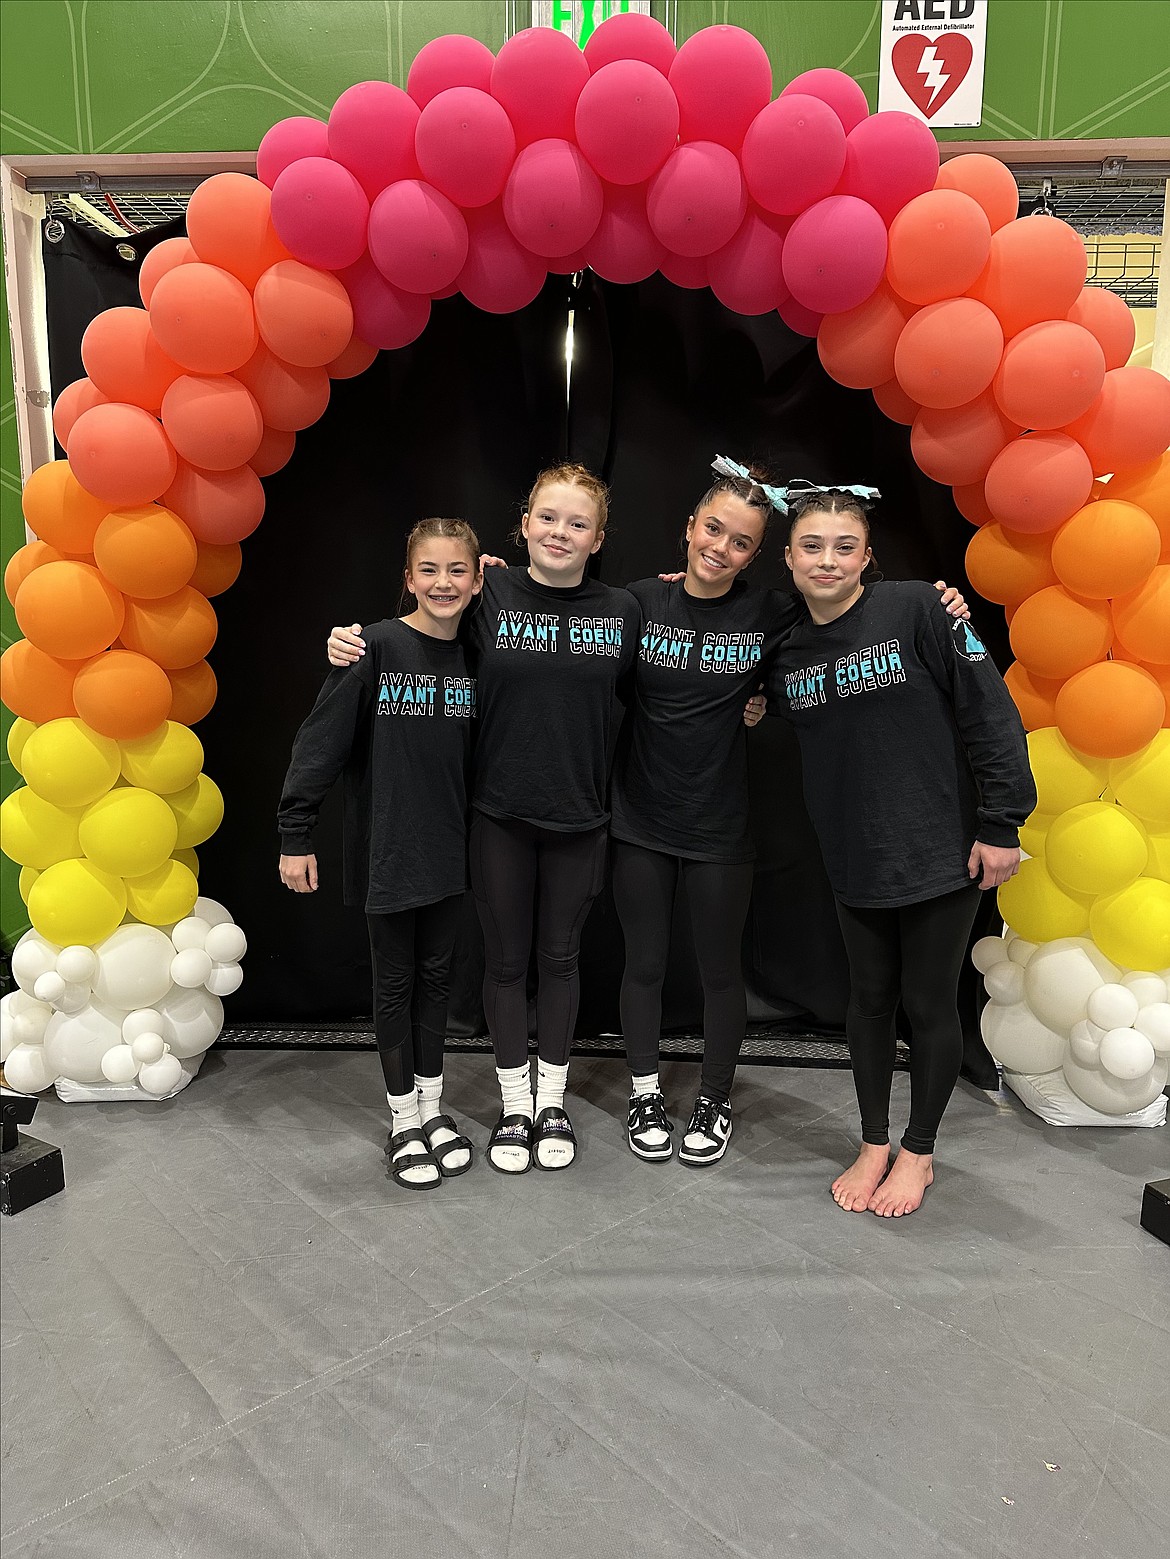 Courtesy photo
Avant Coeur Gymnastics Level 8s competed in Anchorage, Alaska, at the Region 2 regional championships. From left are Georgia Carr, Eva Martin, Kate Mauch and Sage Kermelis.